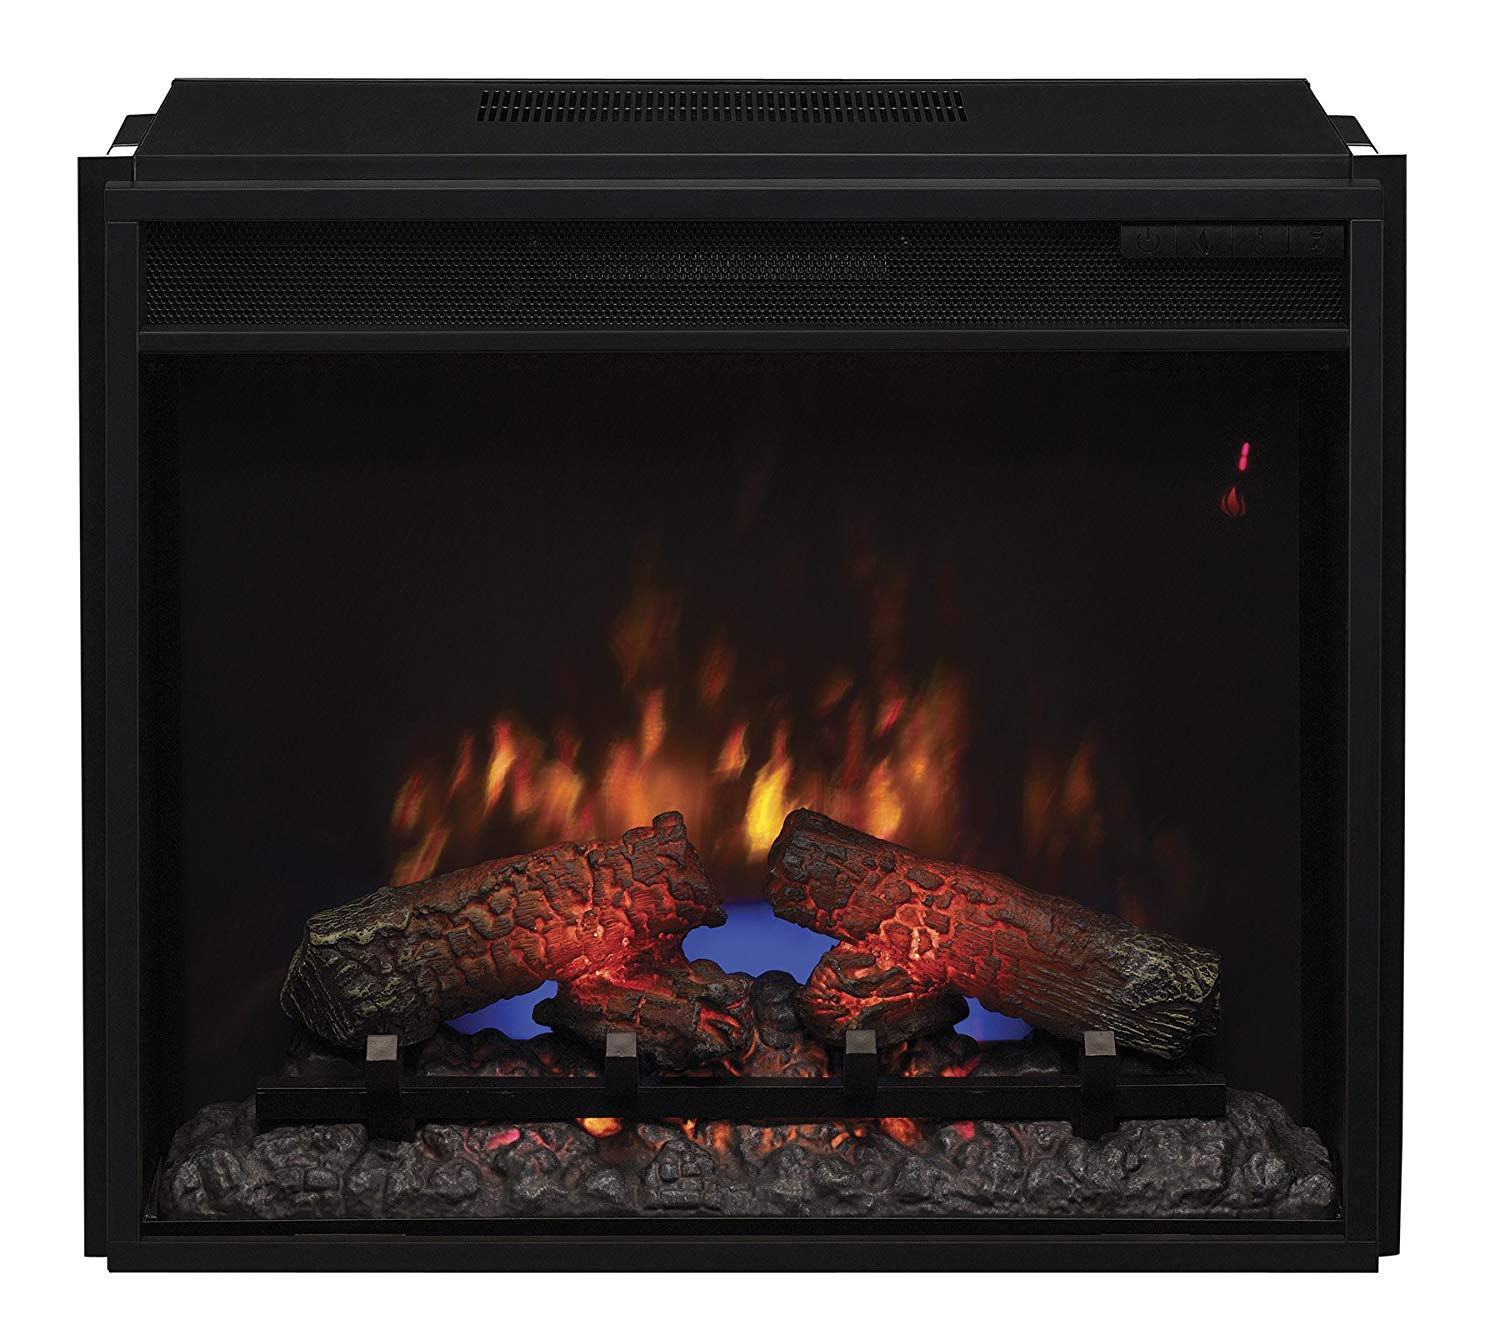 36 Gas Fireplace Insert Beautiful Classicflame 23ef031grp 23" Electric Fireplace Insert with Safer Plug